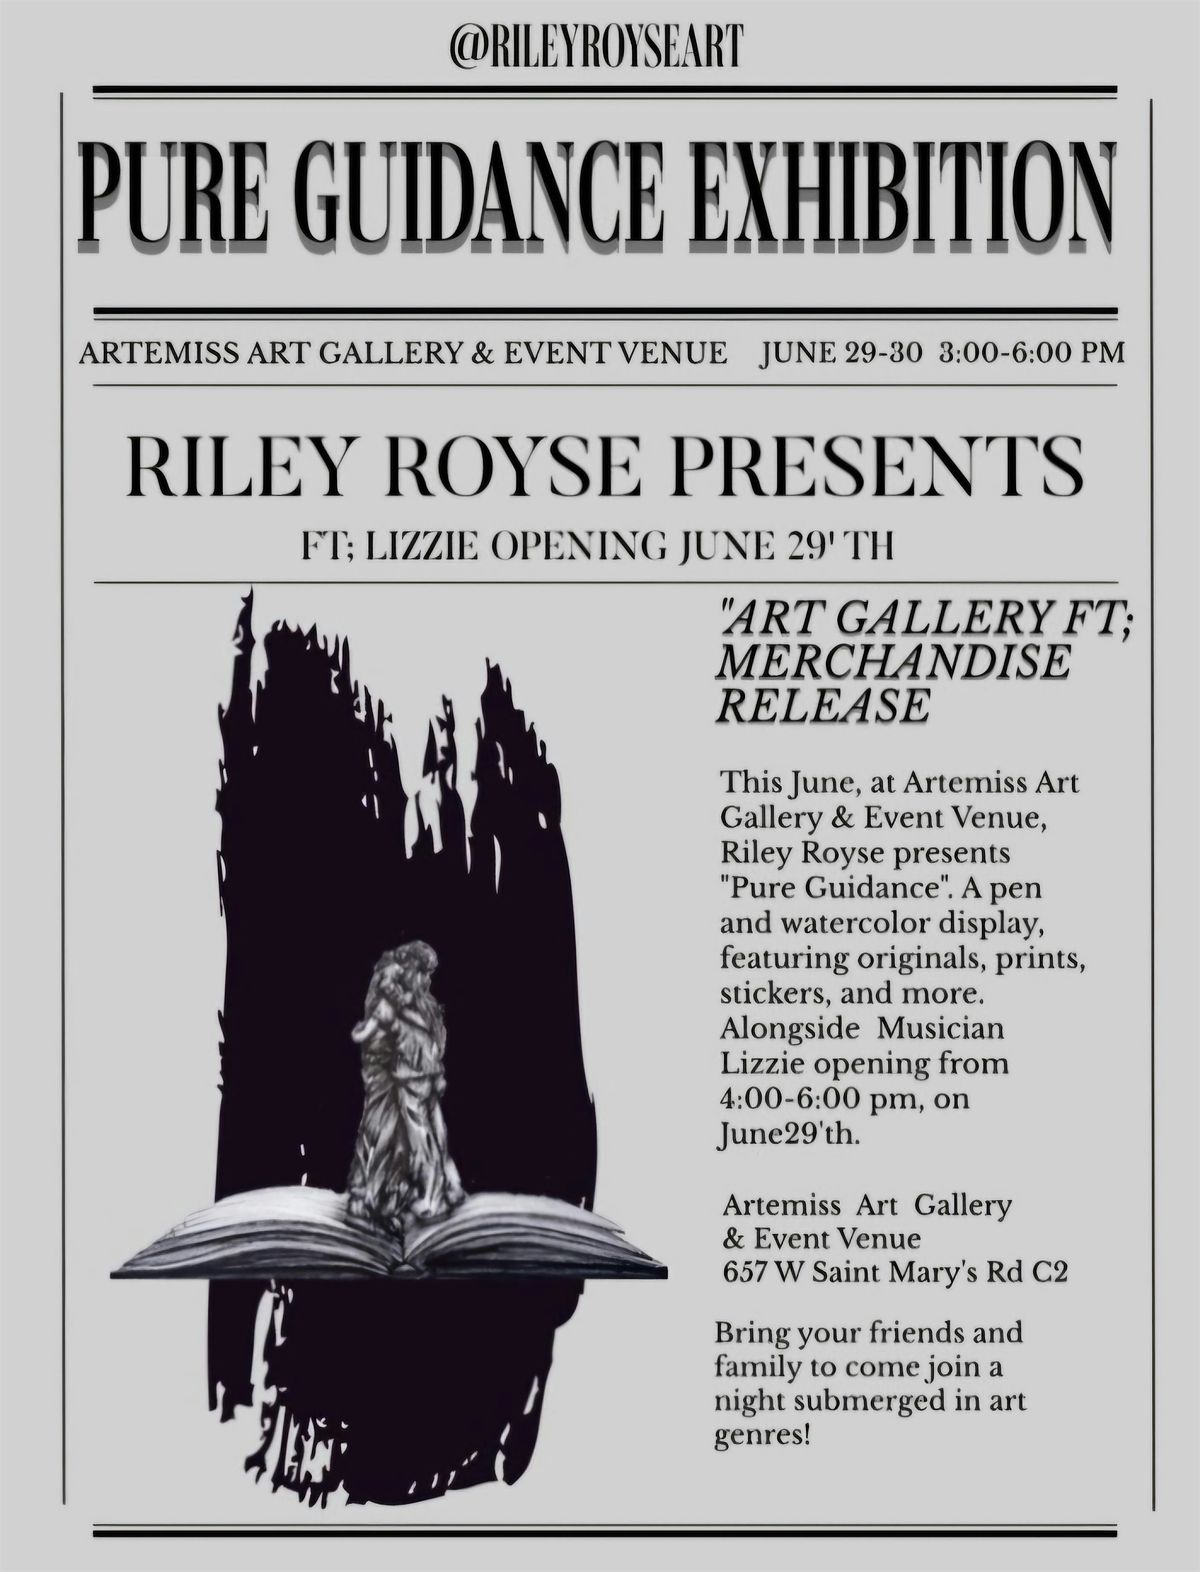 Free Art Exhibition! Pure Guidance Exhibition w\/ Live Music Performance